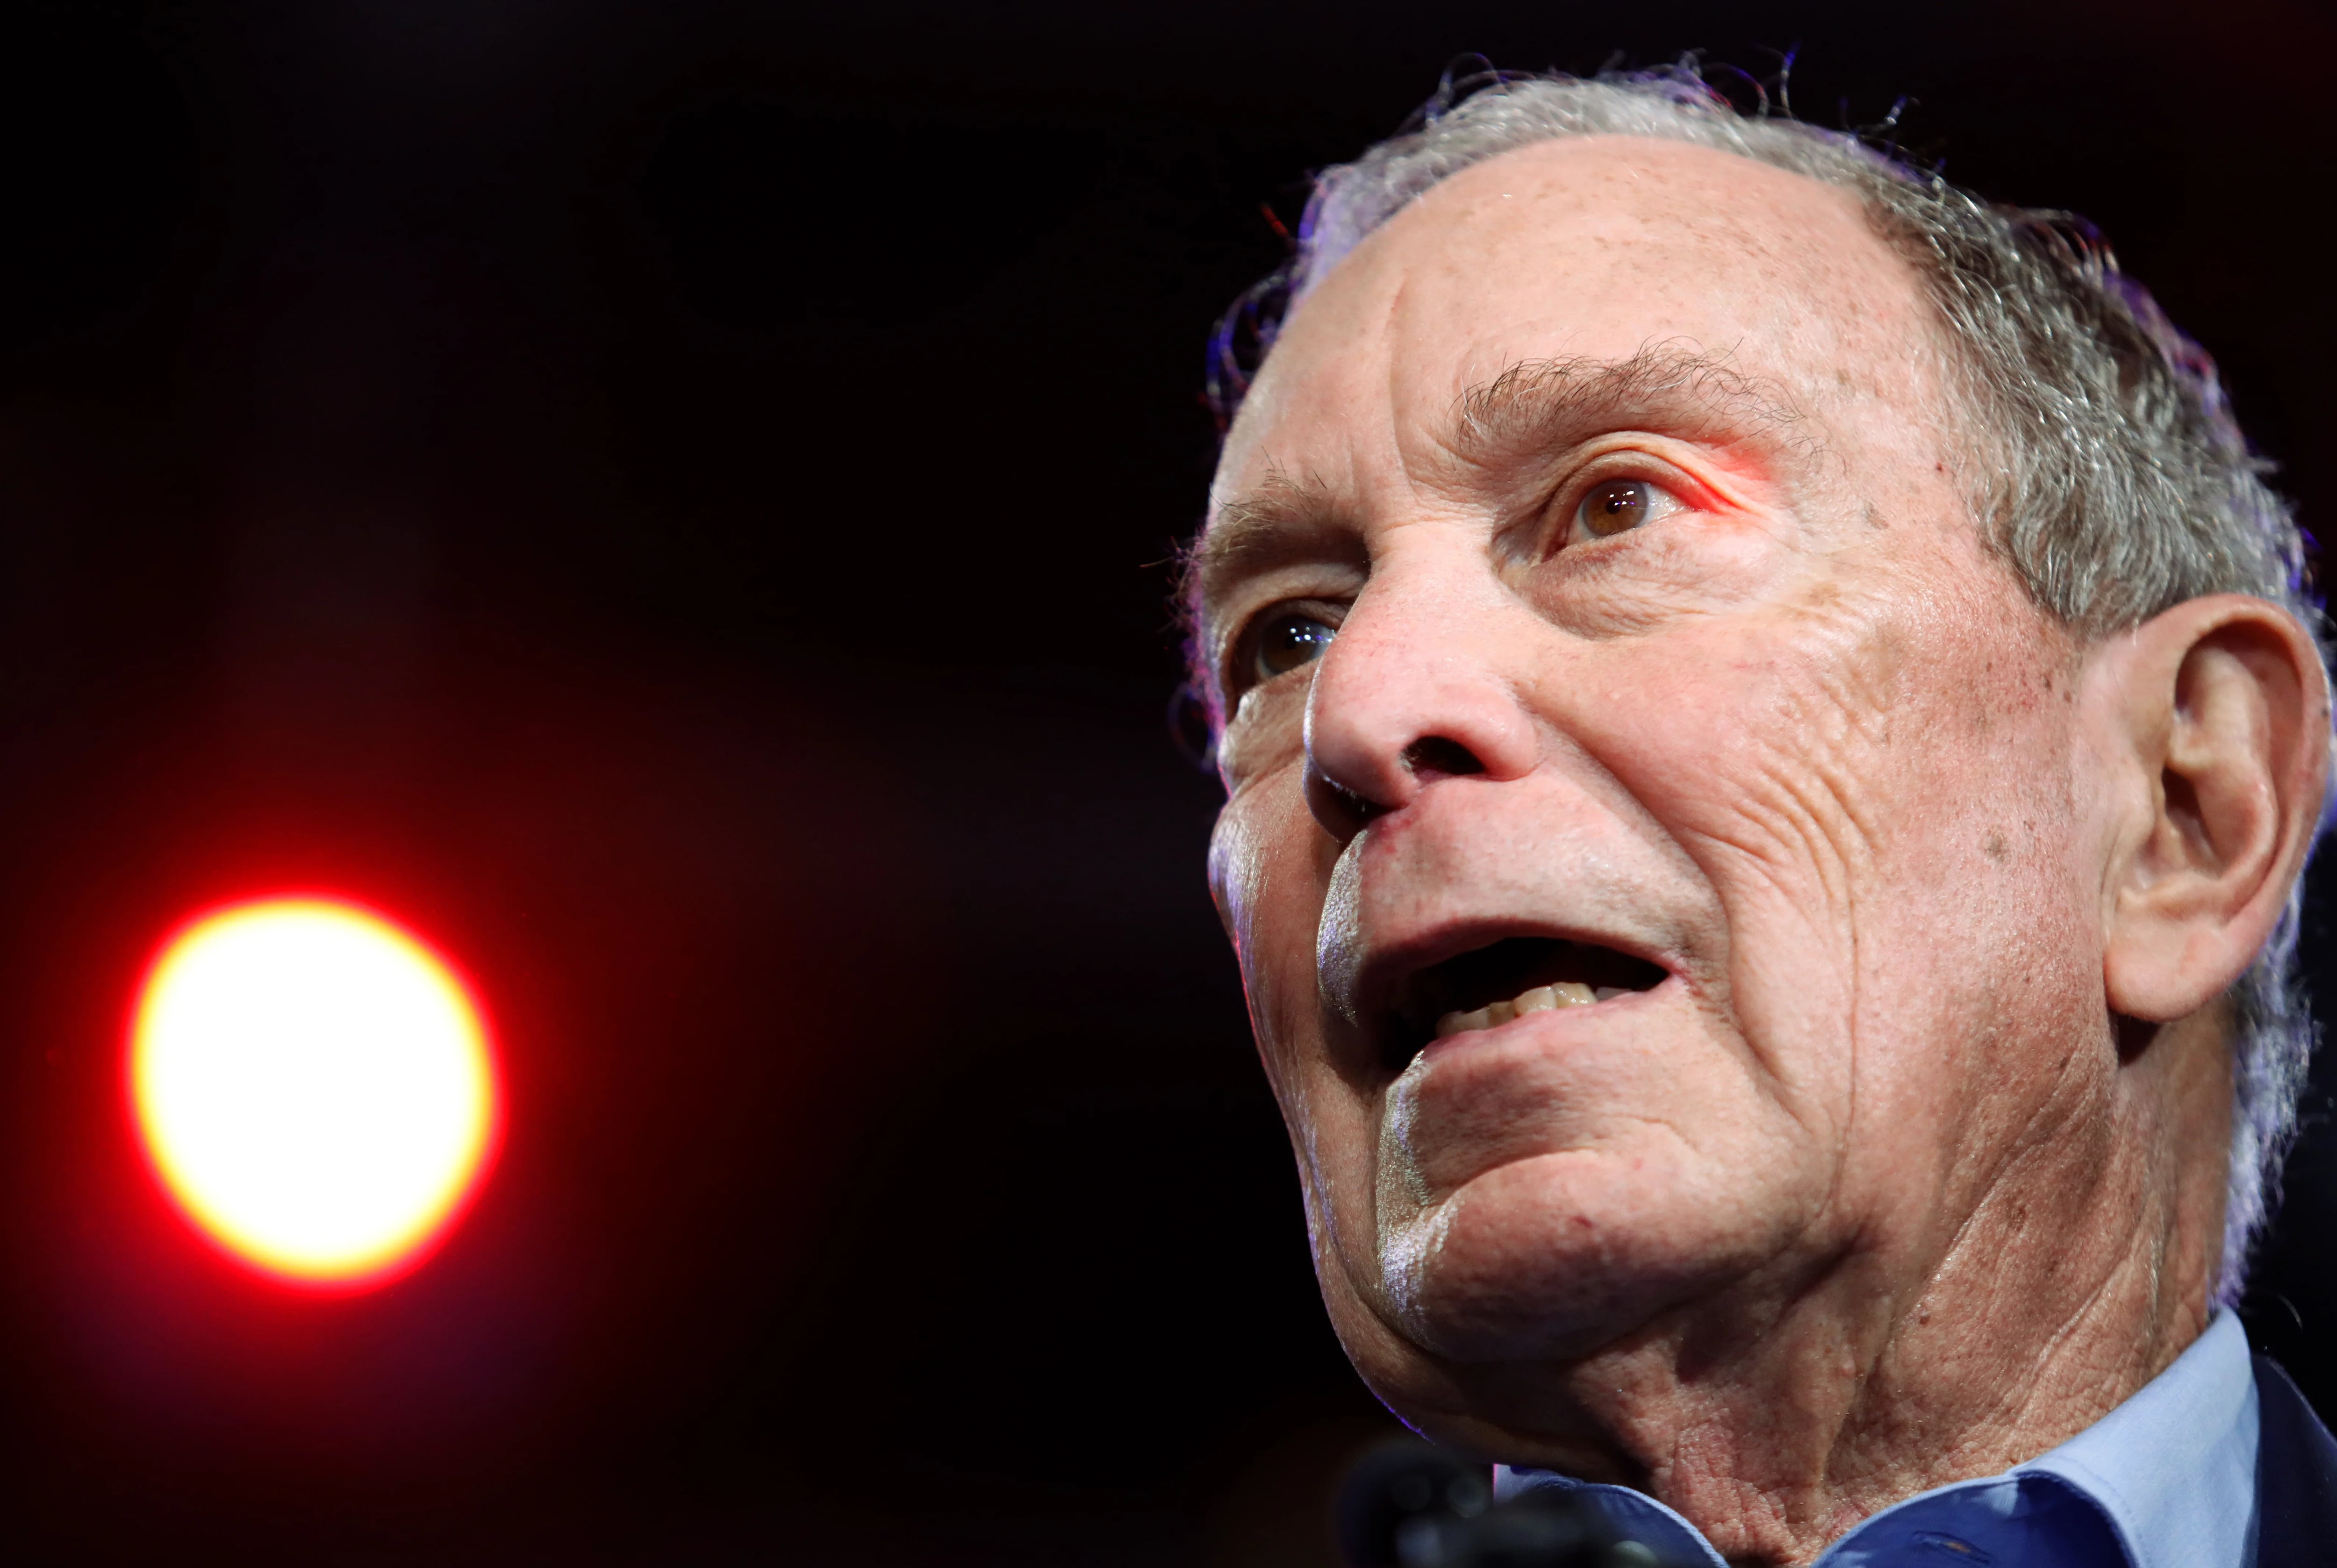 Democratic U.S. presidential candidate Michael Bloomberg speaks at his Super Tuesday night rally in West Palm Beach, Florida, U.S., March 3, 2020. REUTERS/Marco Bello